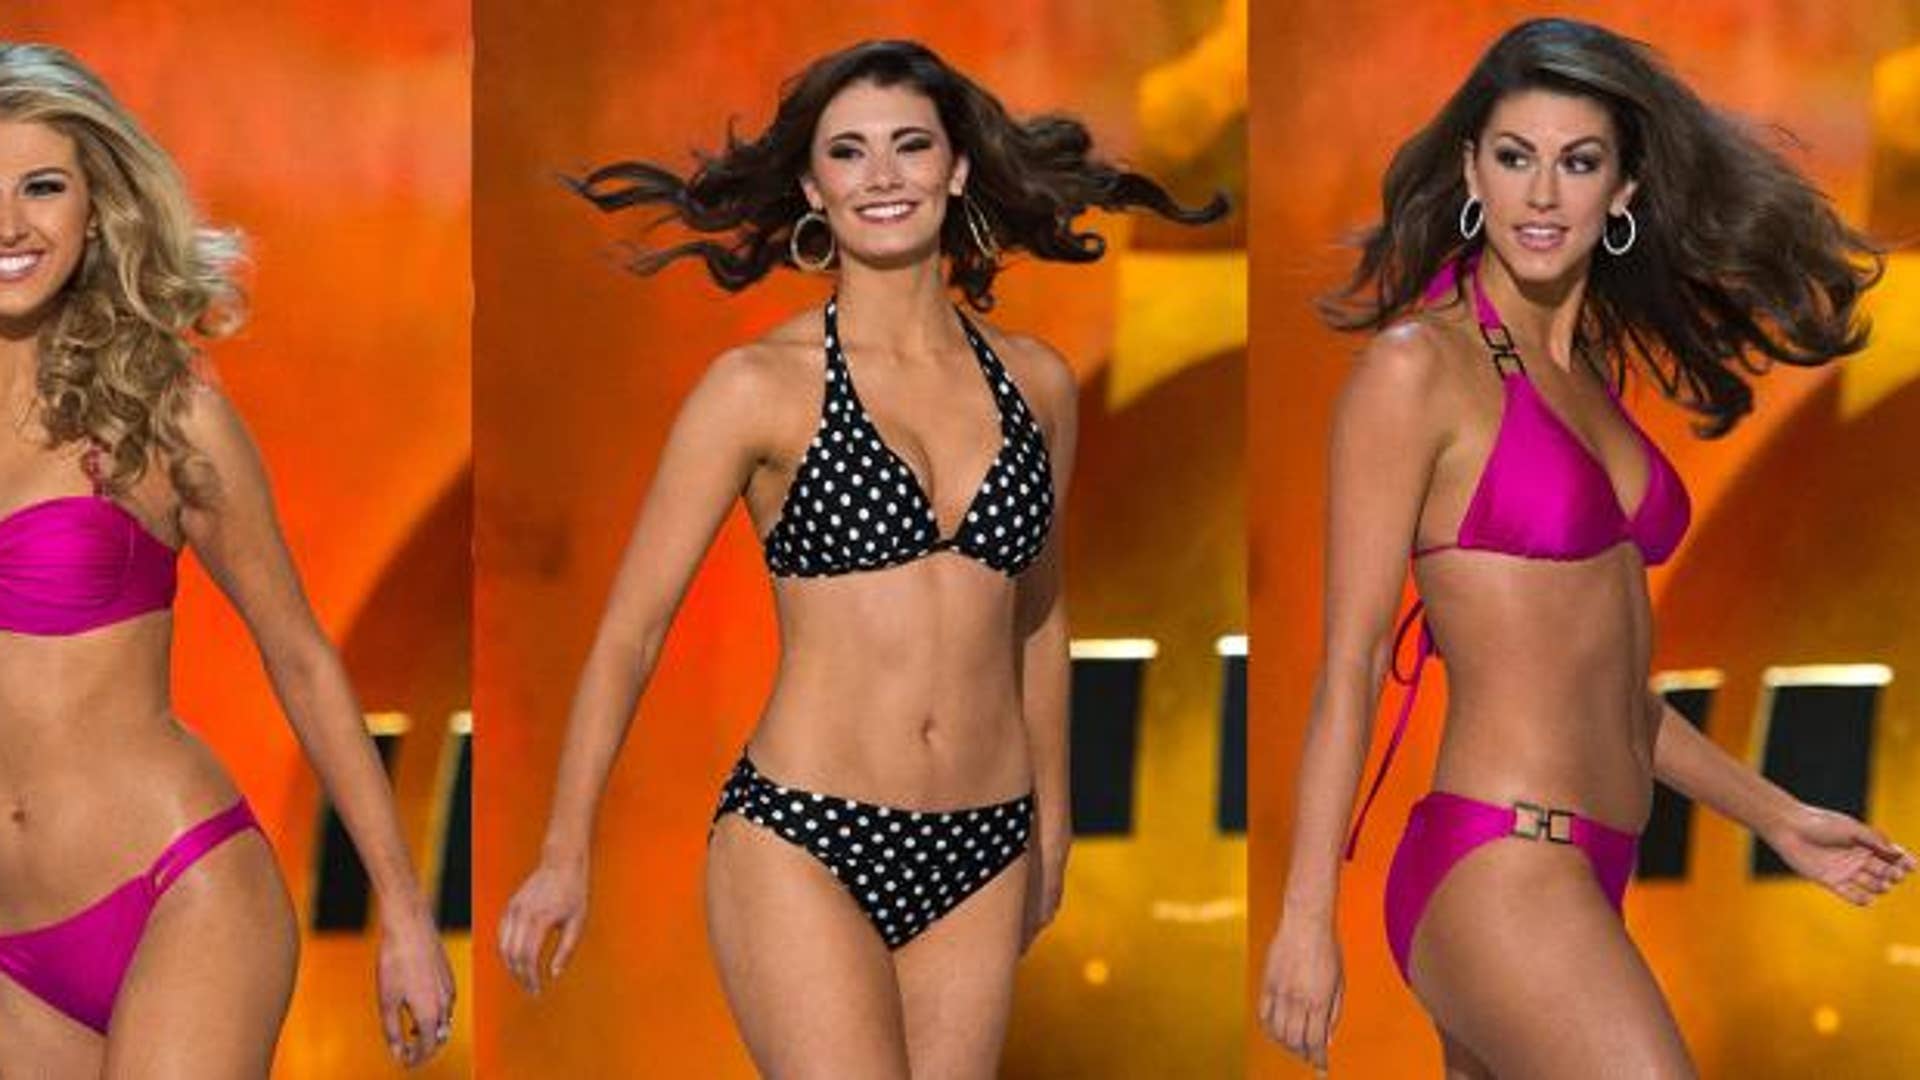 IN PHOTOS: Bb. Pilipinas 2015 candidates sizzle in sexy swimsuit |  Philstar.com